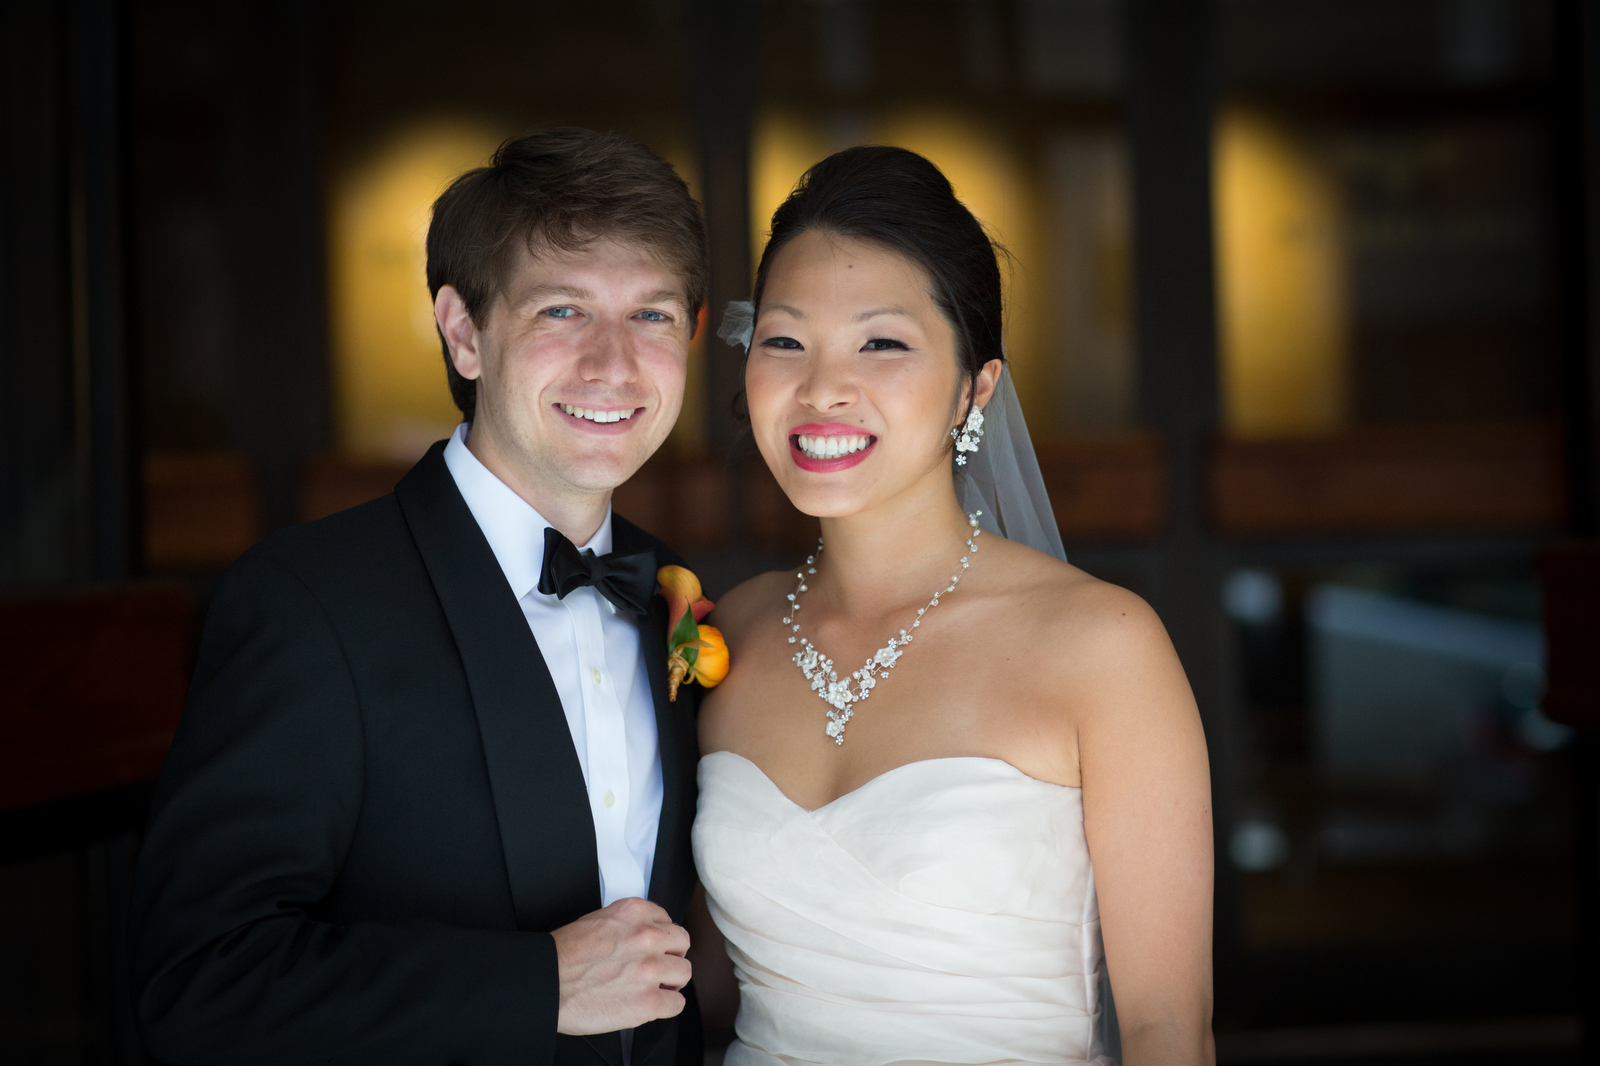 The bride and groom pose for a portrait at the Washington Athletic Club prior to their wedding at the Seattle Aquarium (Photography by Scott Eklund/Red Box Pictures)